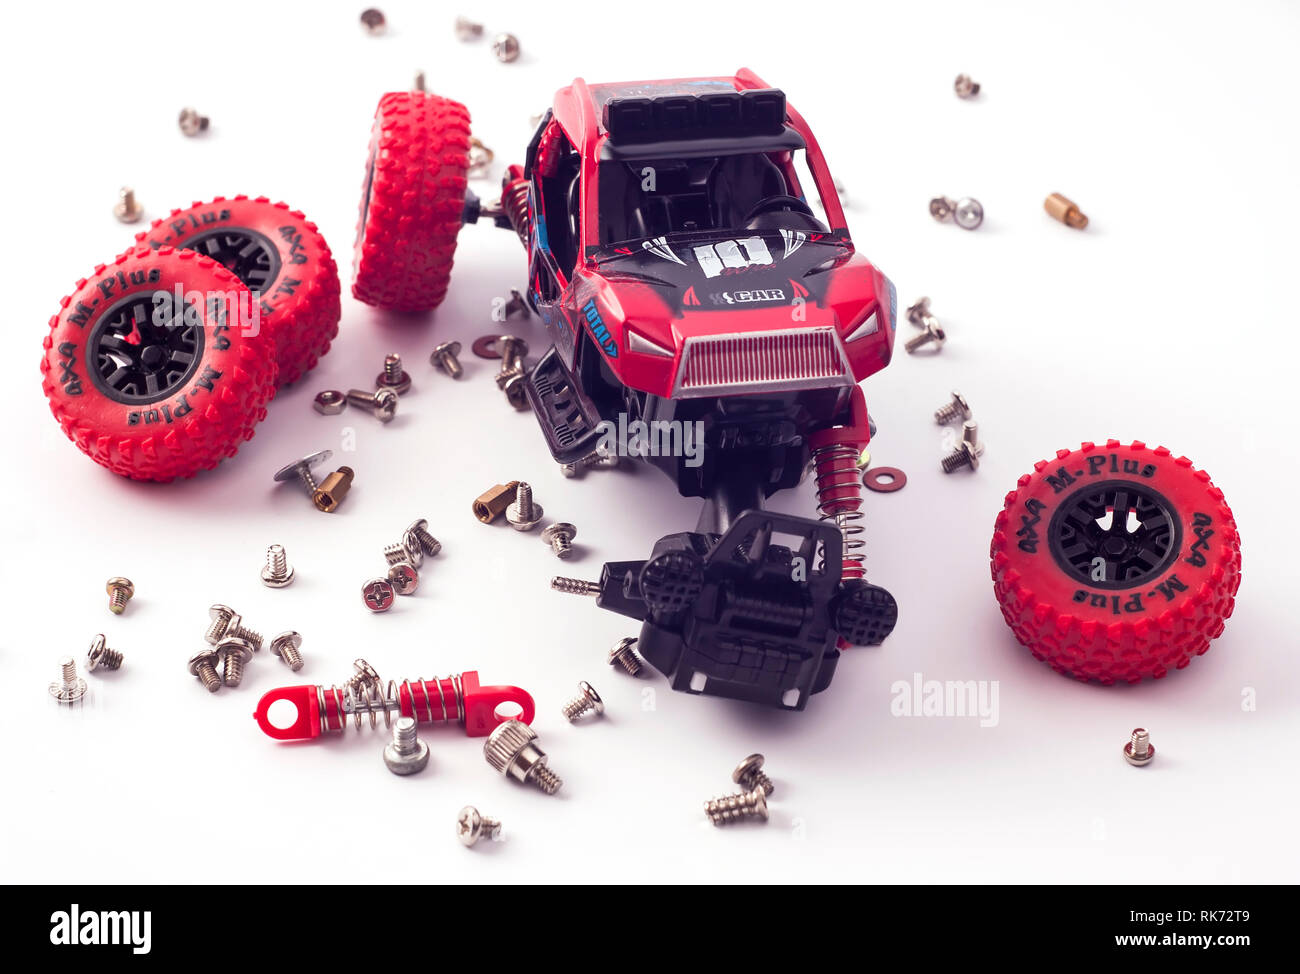 Disassembled car and scattered parts. Broken toy Stock Photo